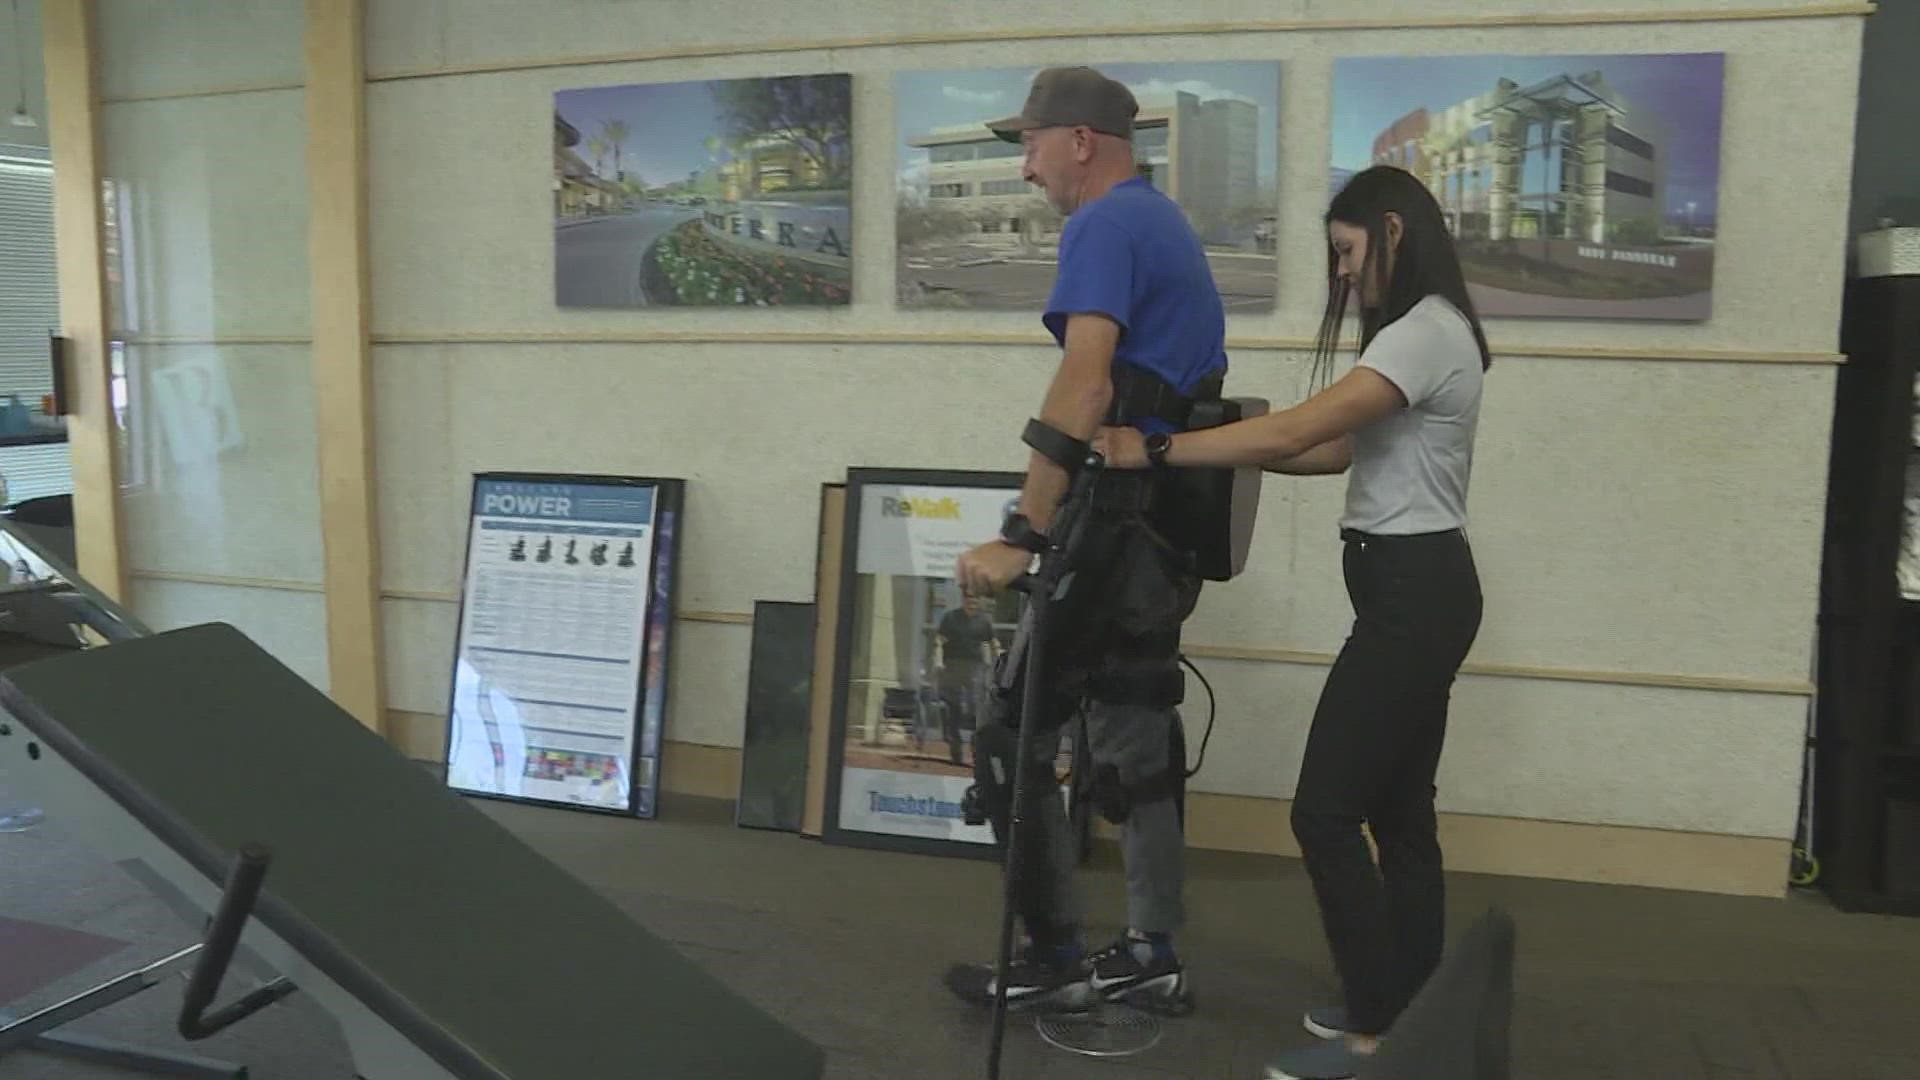 Richard Neider lost the use of his legs 10 years ago during Operation Iraqi Freedom. Now he'll be able to walk alongside his wife, thanks to new technology.